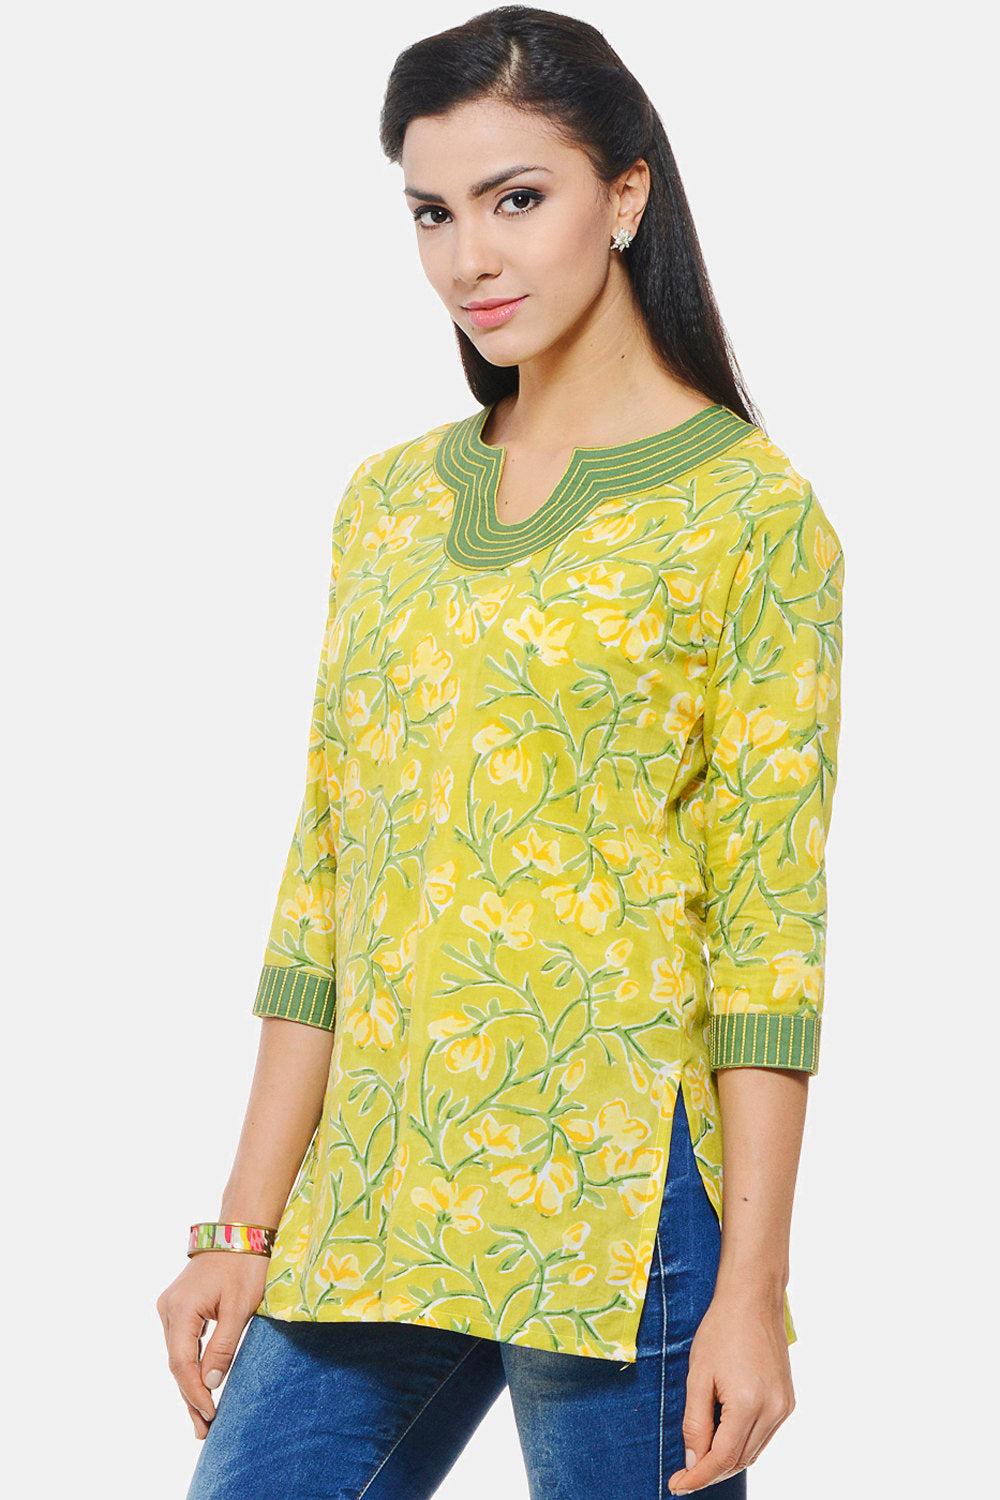 Hand Block Printed Indian Kurti in pastel green floral design with Embroidery on neck and sleeves